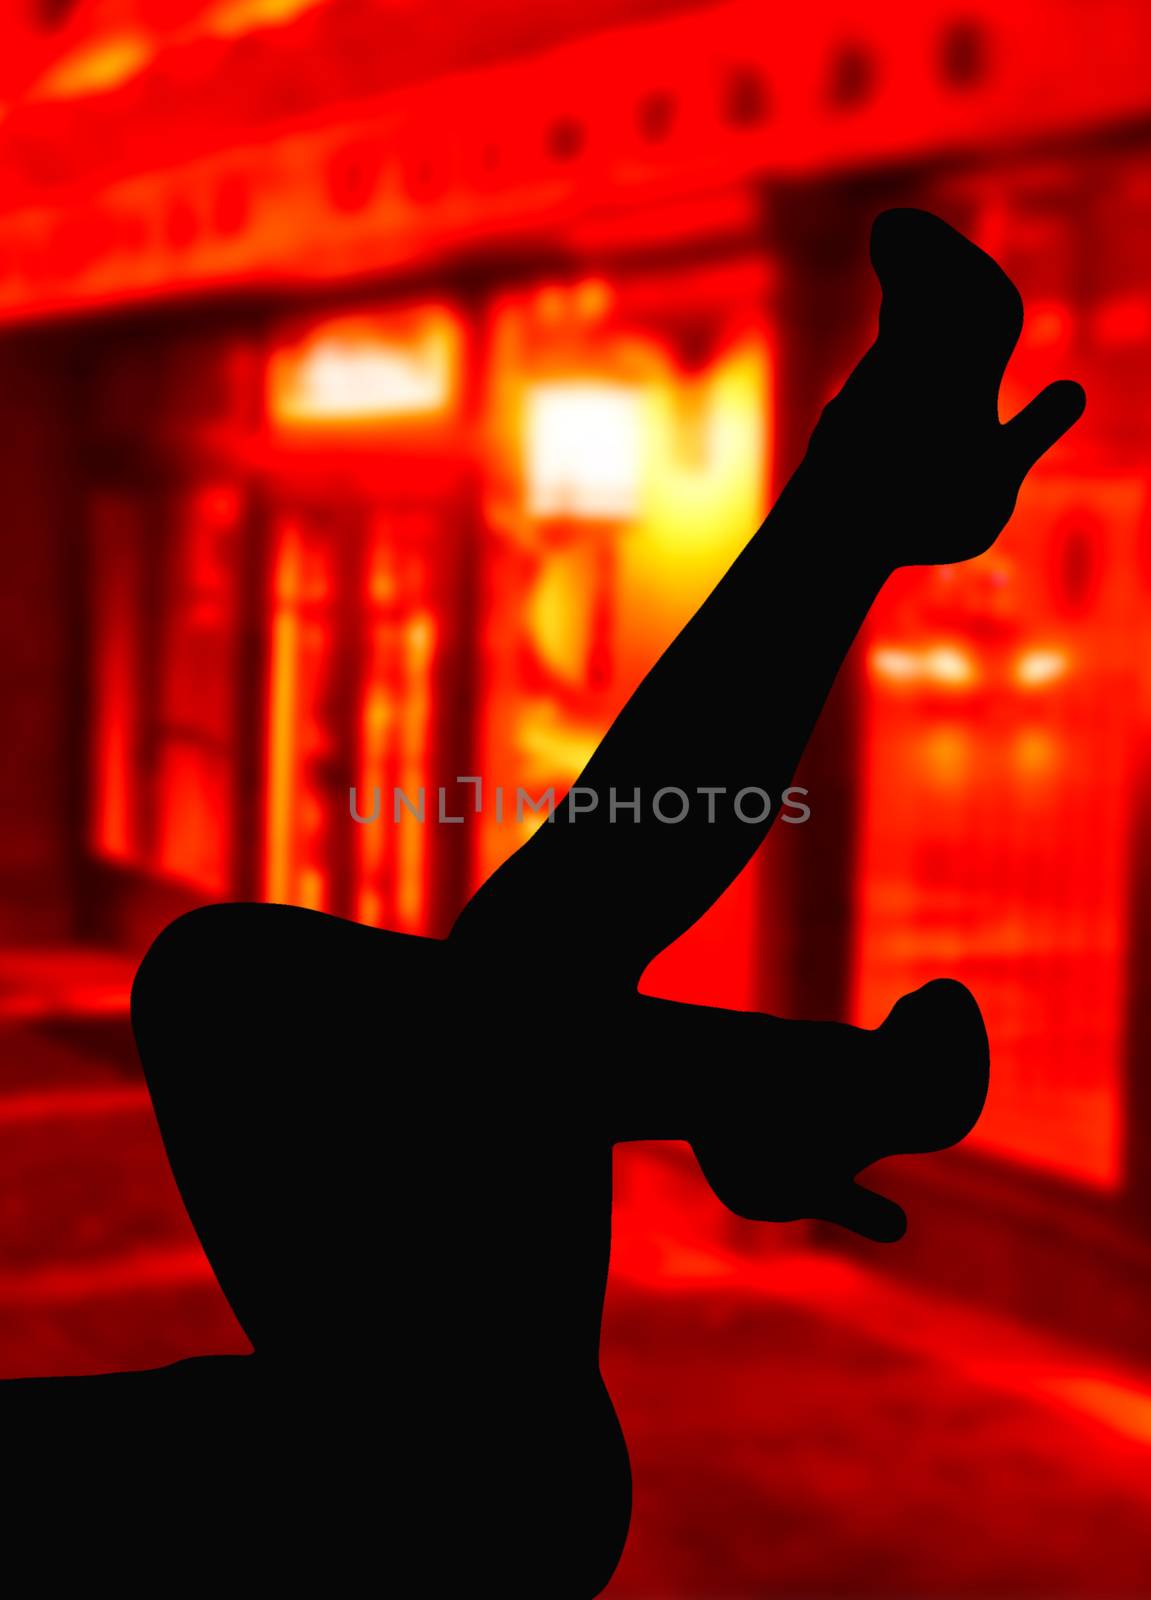 Silhouette of some sexy feminine legs on the street in front of red windows hooker street background